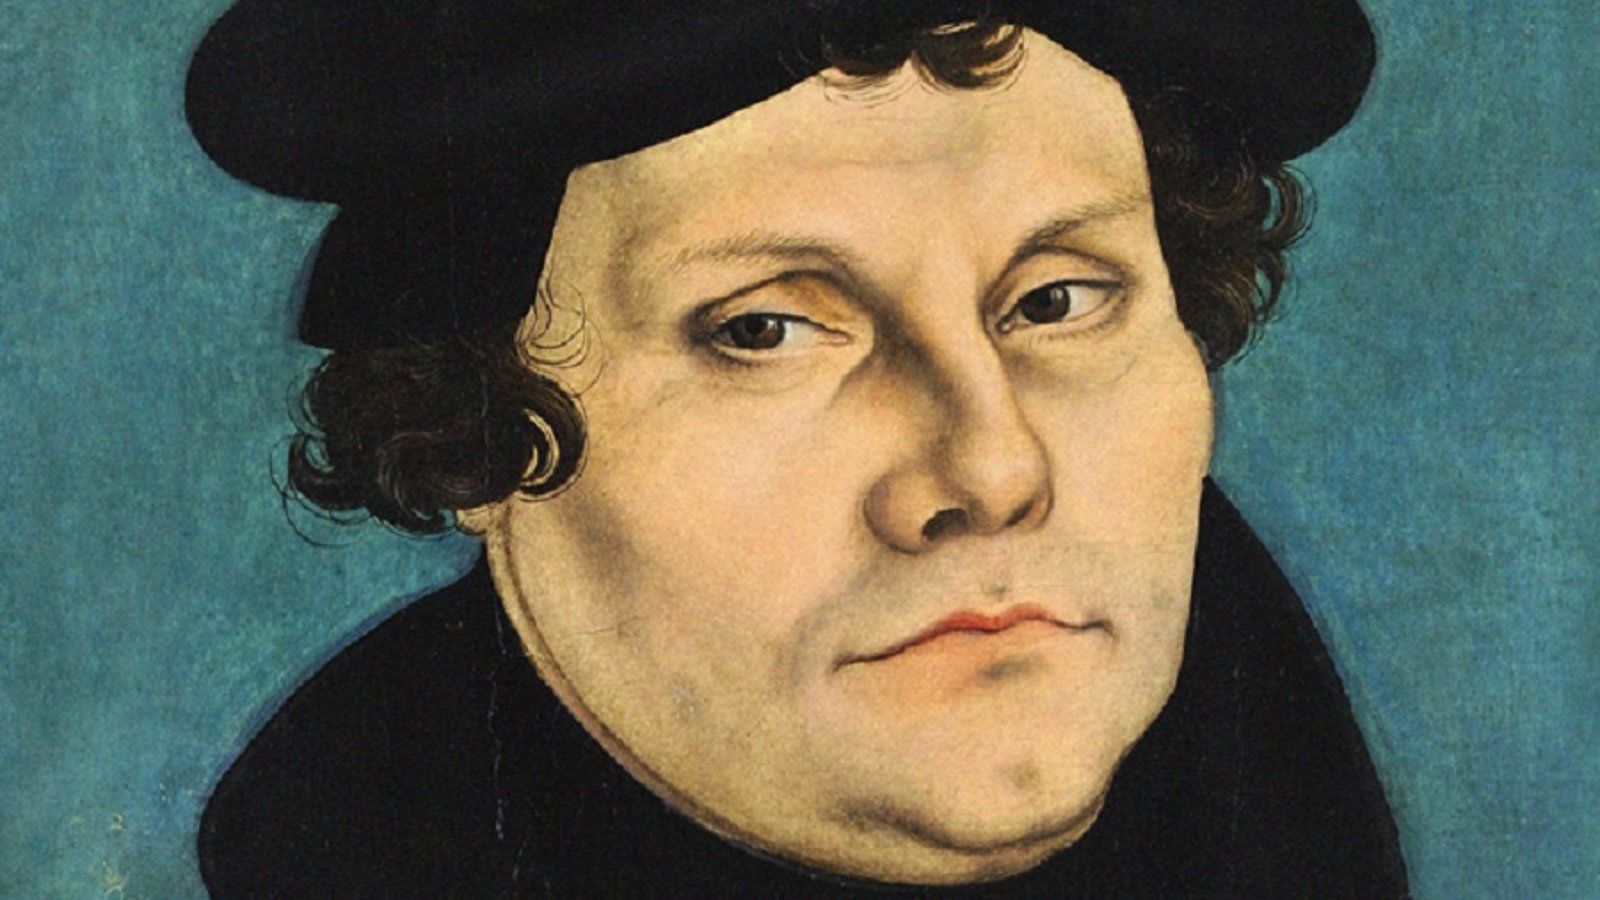 Rick Steves: Luther and the Reformation - The 500th Anniversary of the Protestant Reformation